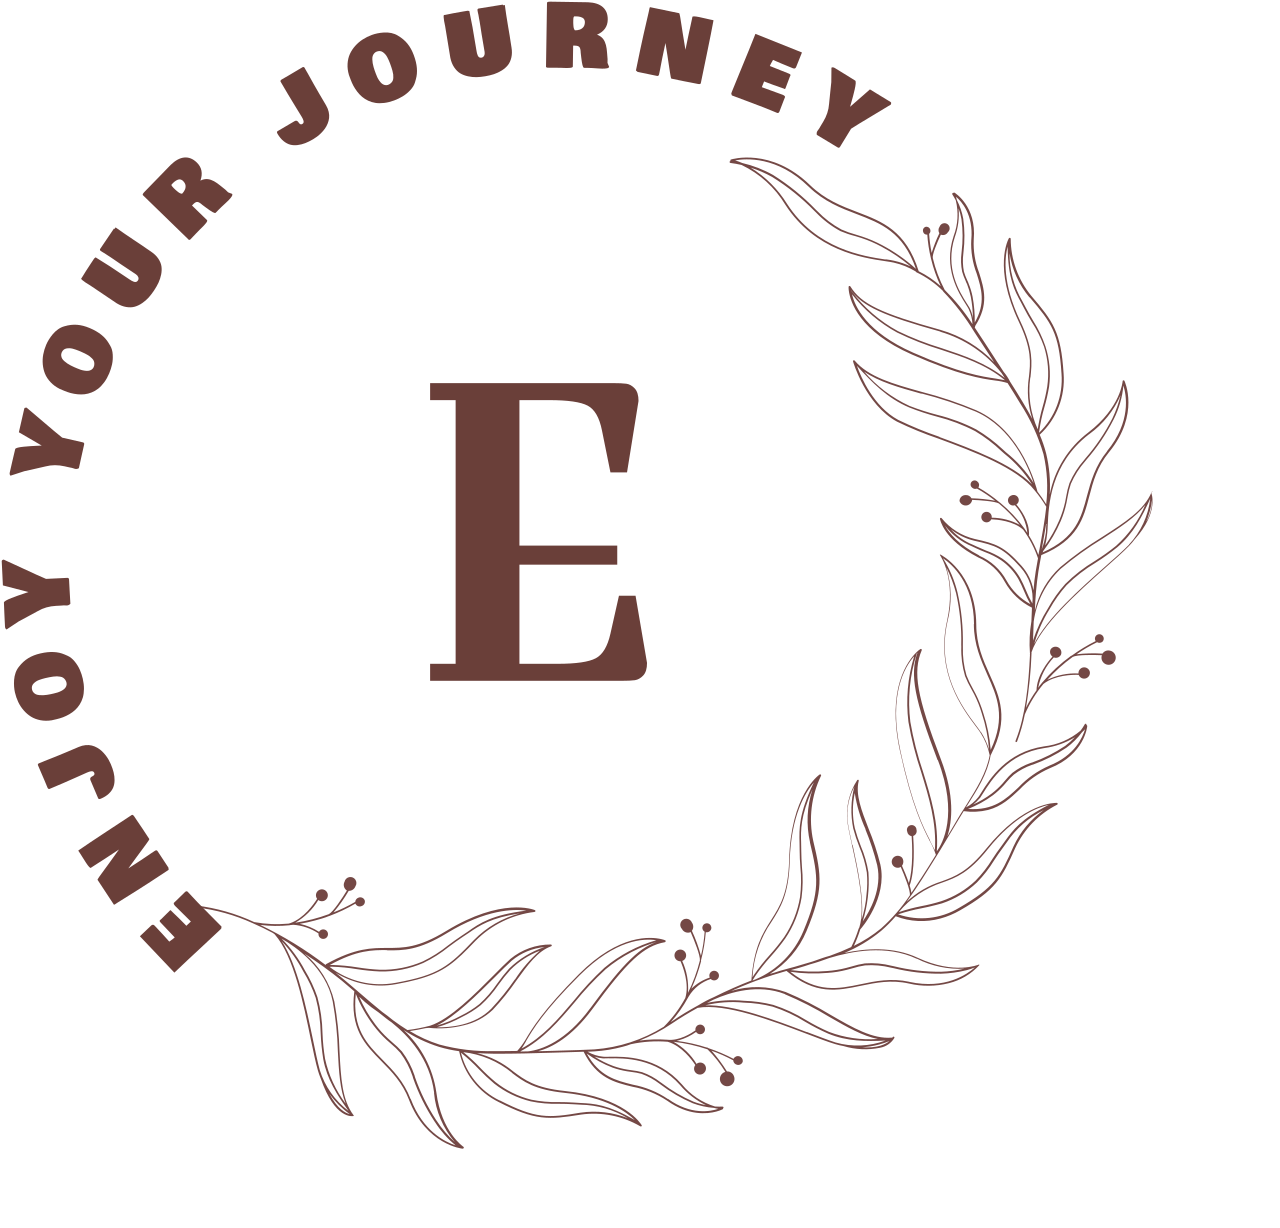 ENJOY YOUR JOURNEY 's web page